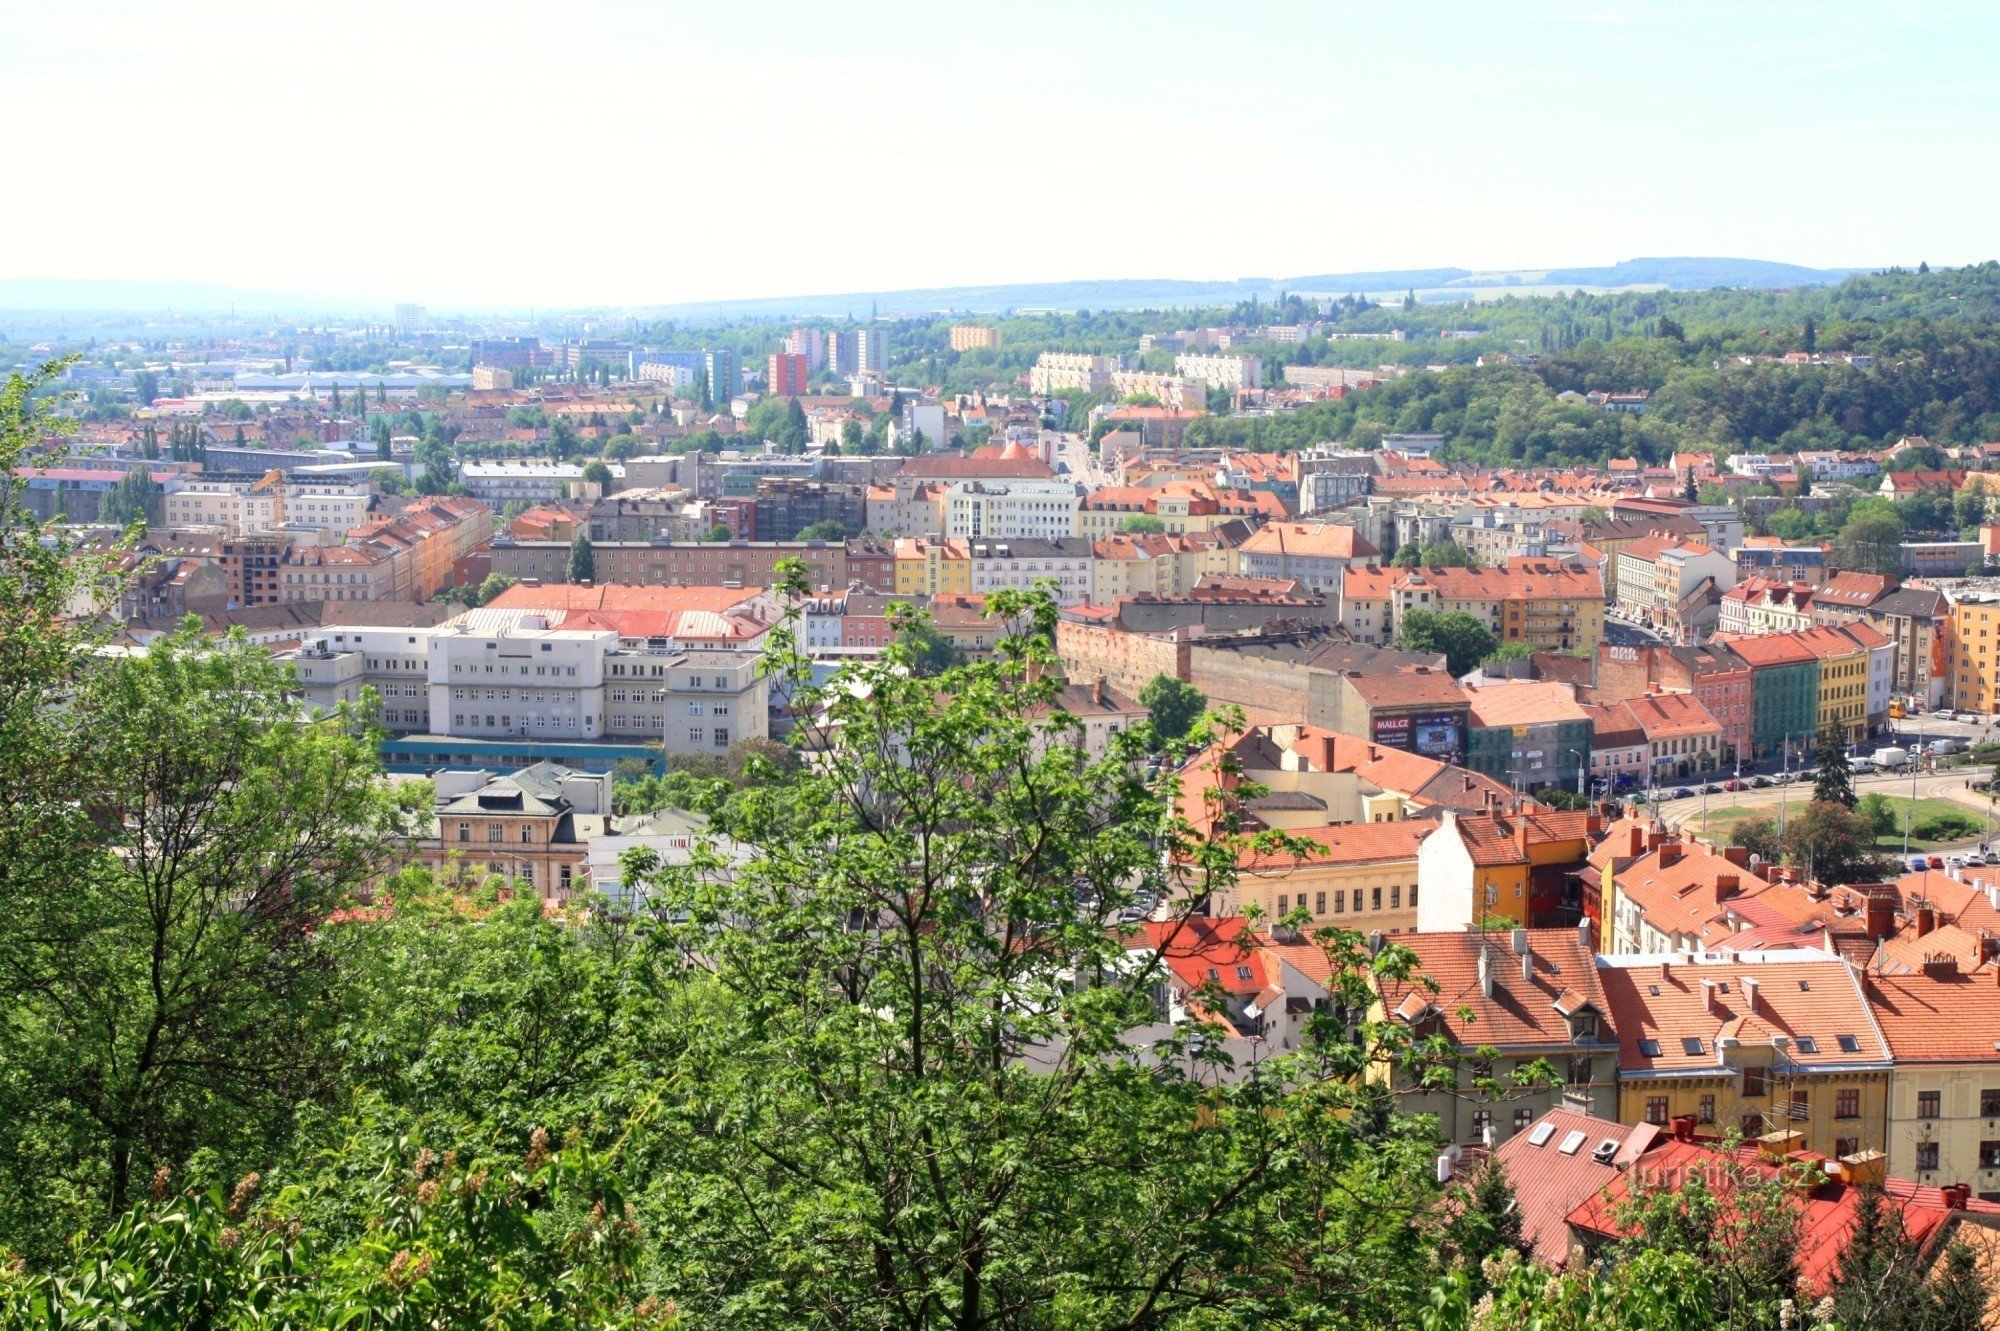 View of the part of Brno towards the south